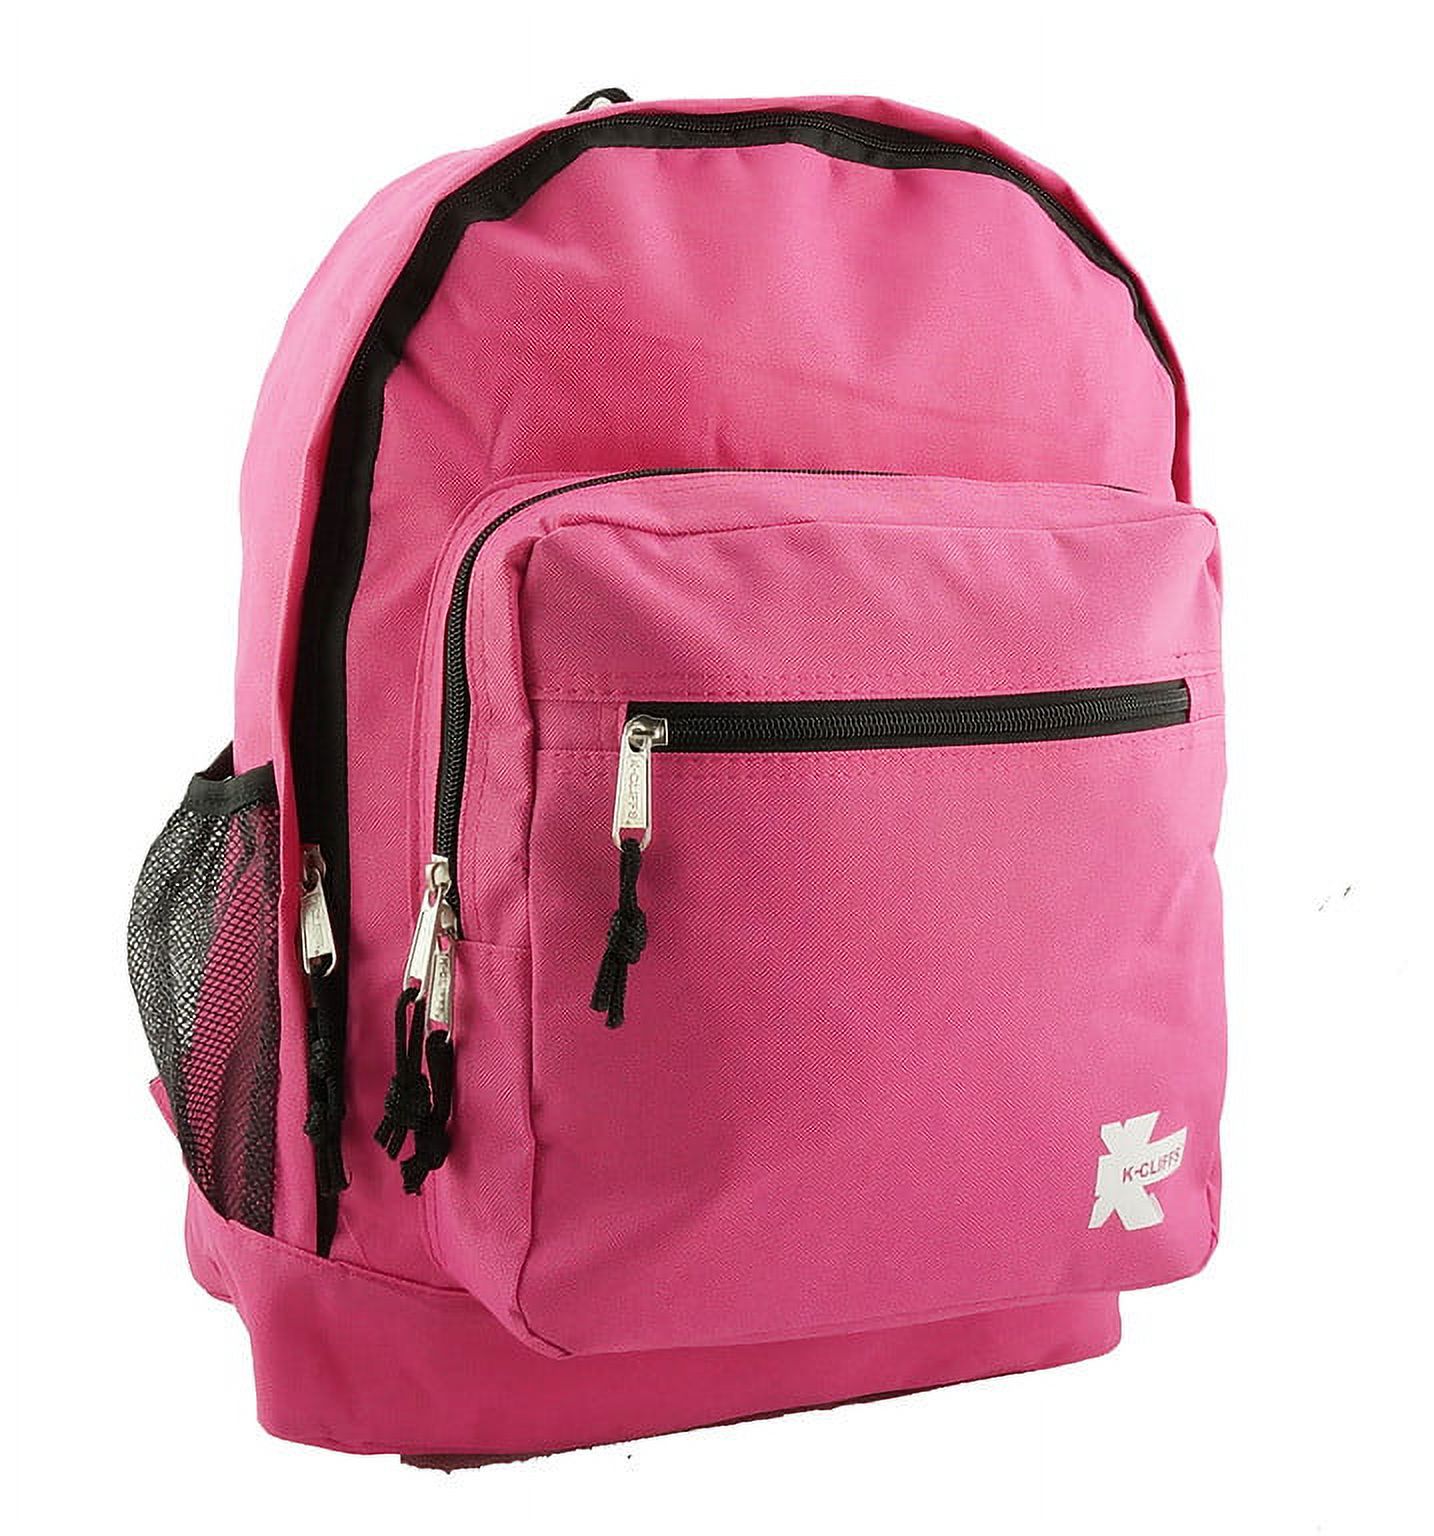 Classic Large Backpack for College Students and Kids, Lightweight Durable Travel Backpack Fits 15.6 Laptops Water Resistant Daypack Unisex Adjustable Padded Straps for Casual Everyday Use (Hot Pink) - image 2 of 4